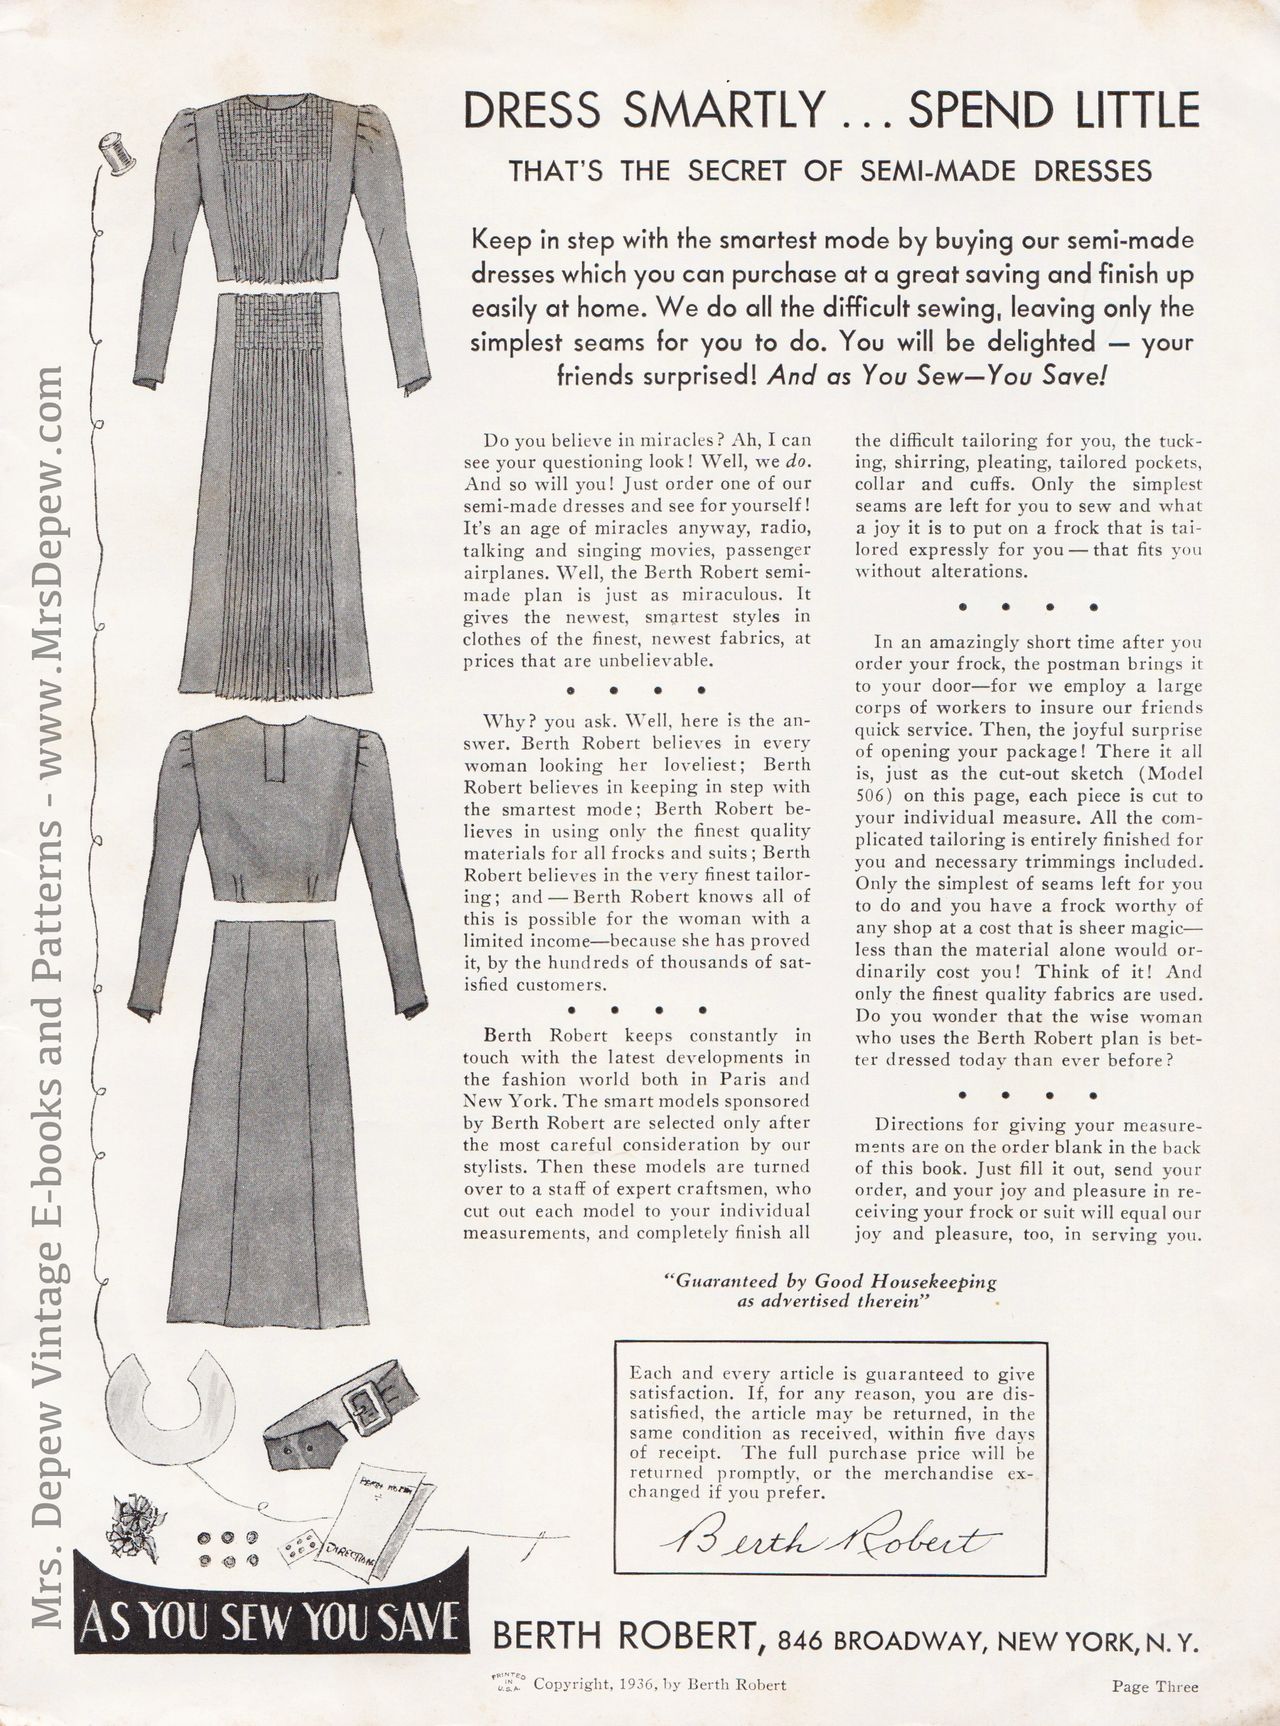 Spring Styles for 1915 from the Standard Mail Order Co. - The Dreamstress